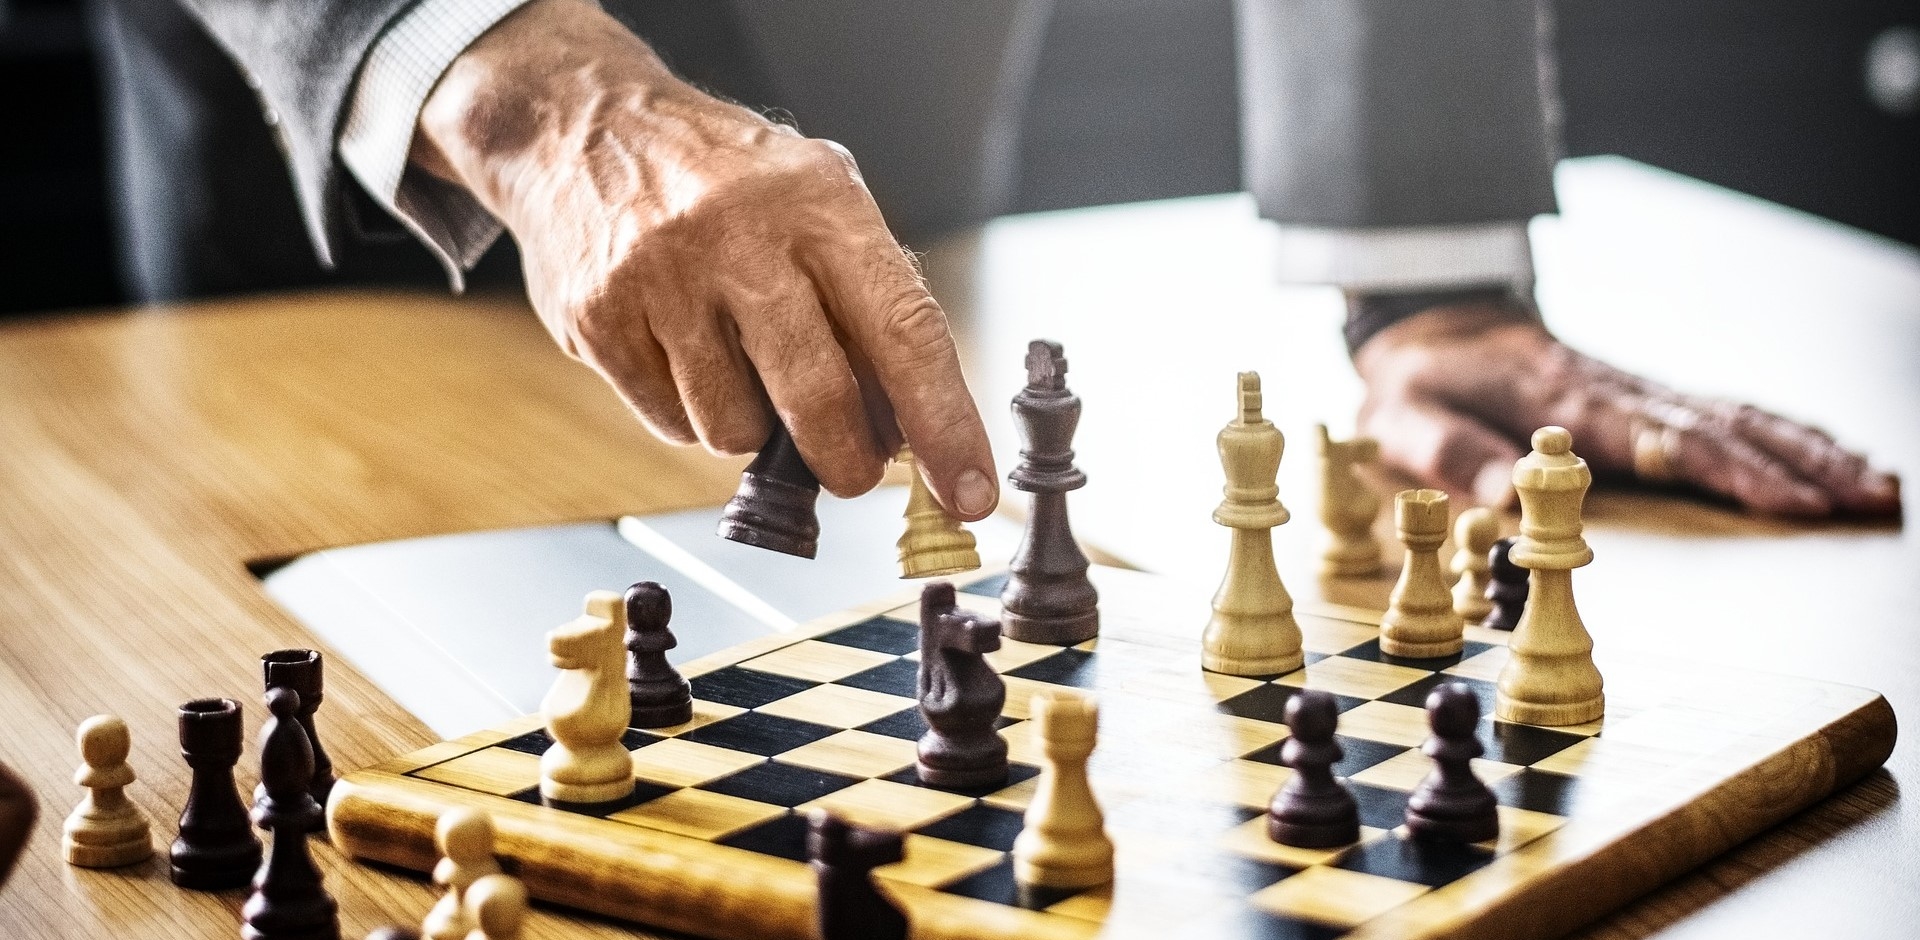 For a leader, chess is better than checkers